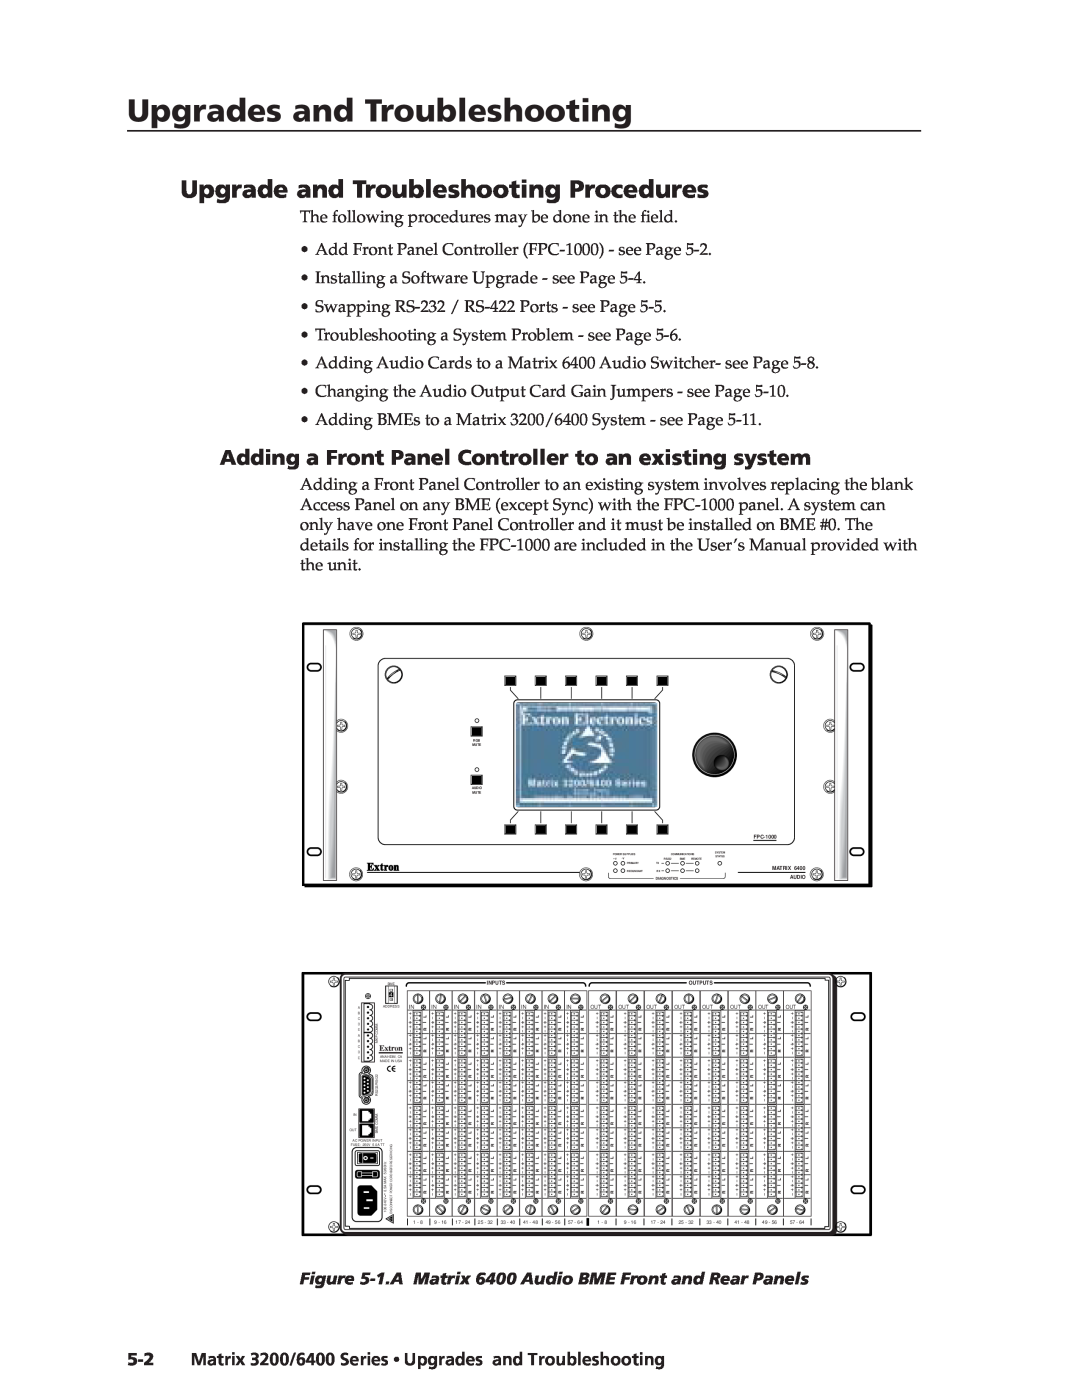 Extron electronic 3200s manual UpgradesandandTroubleshooting,co t’d, Upgrade and Troubleshooting Procedures 